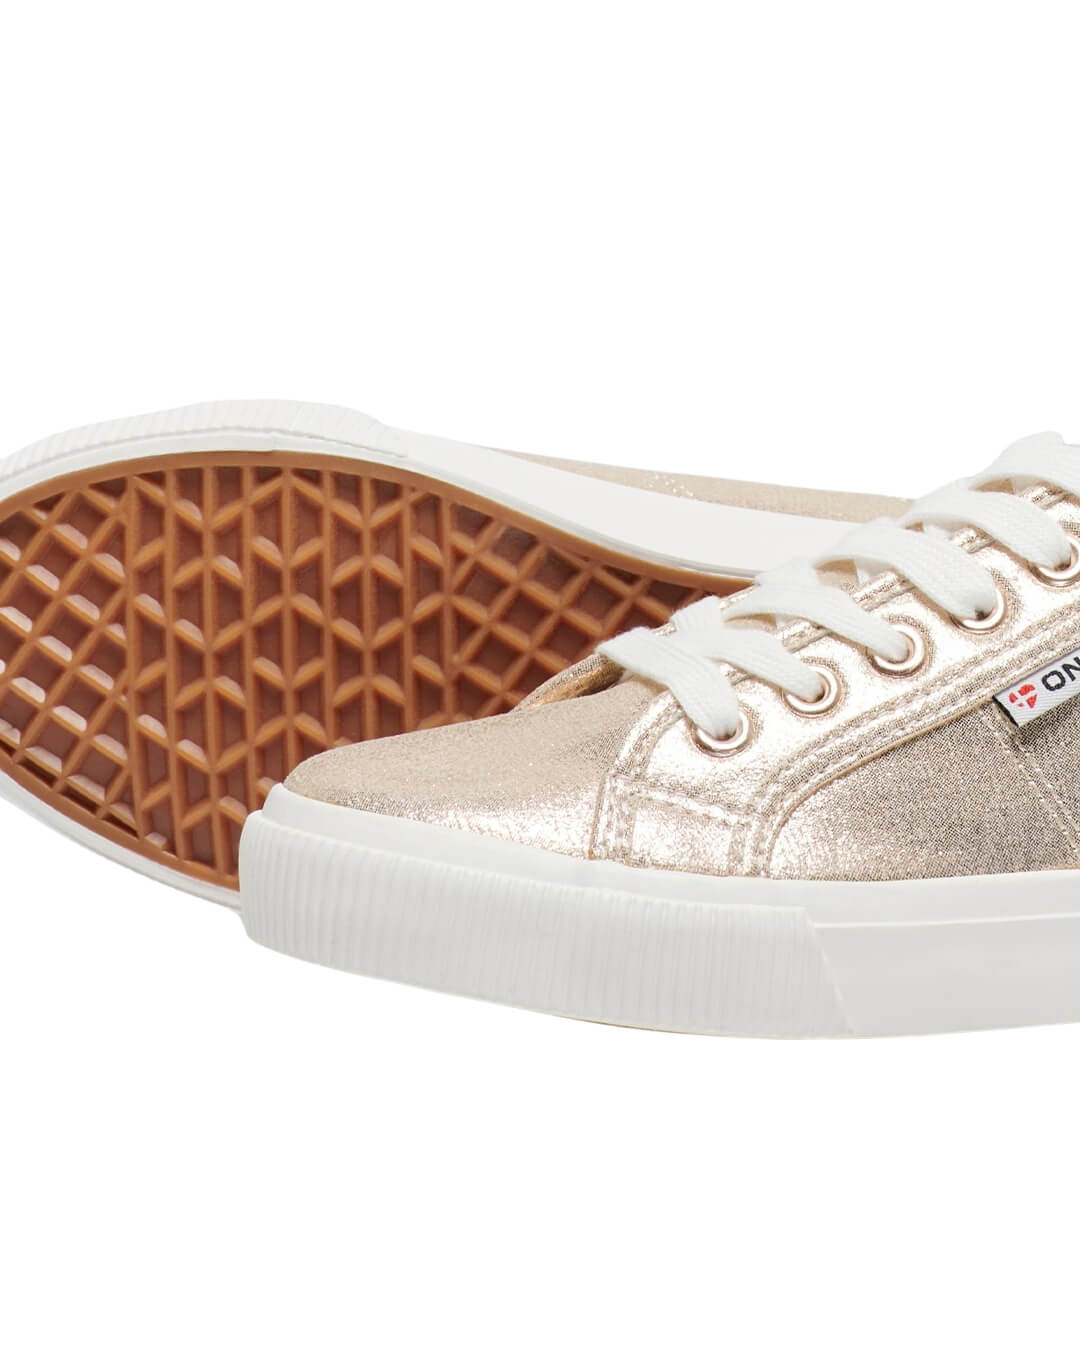 Only Shoes Only Metallic Gold Canvas Sneakers